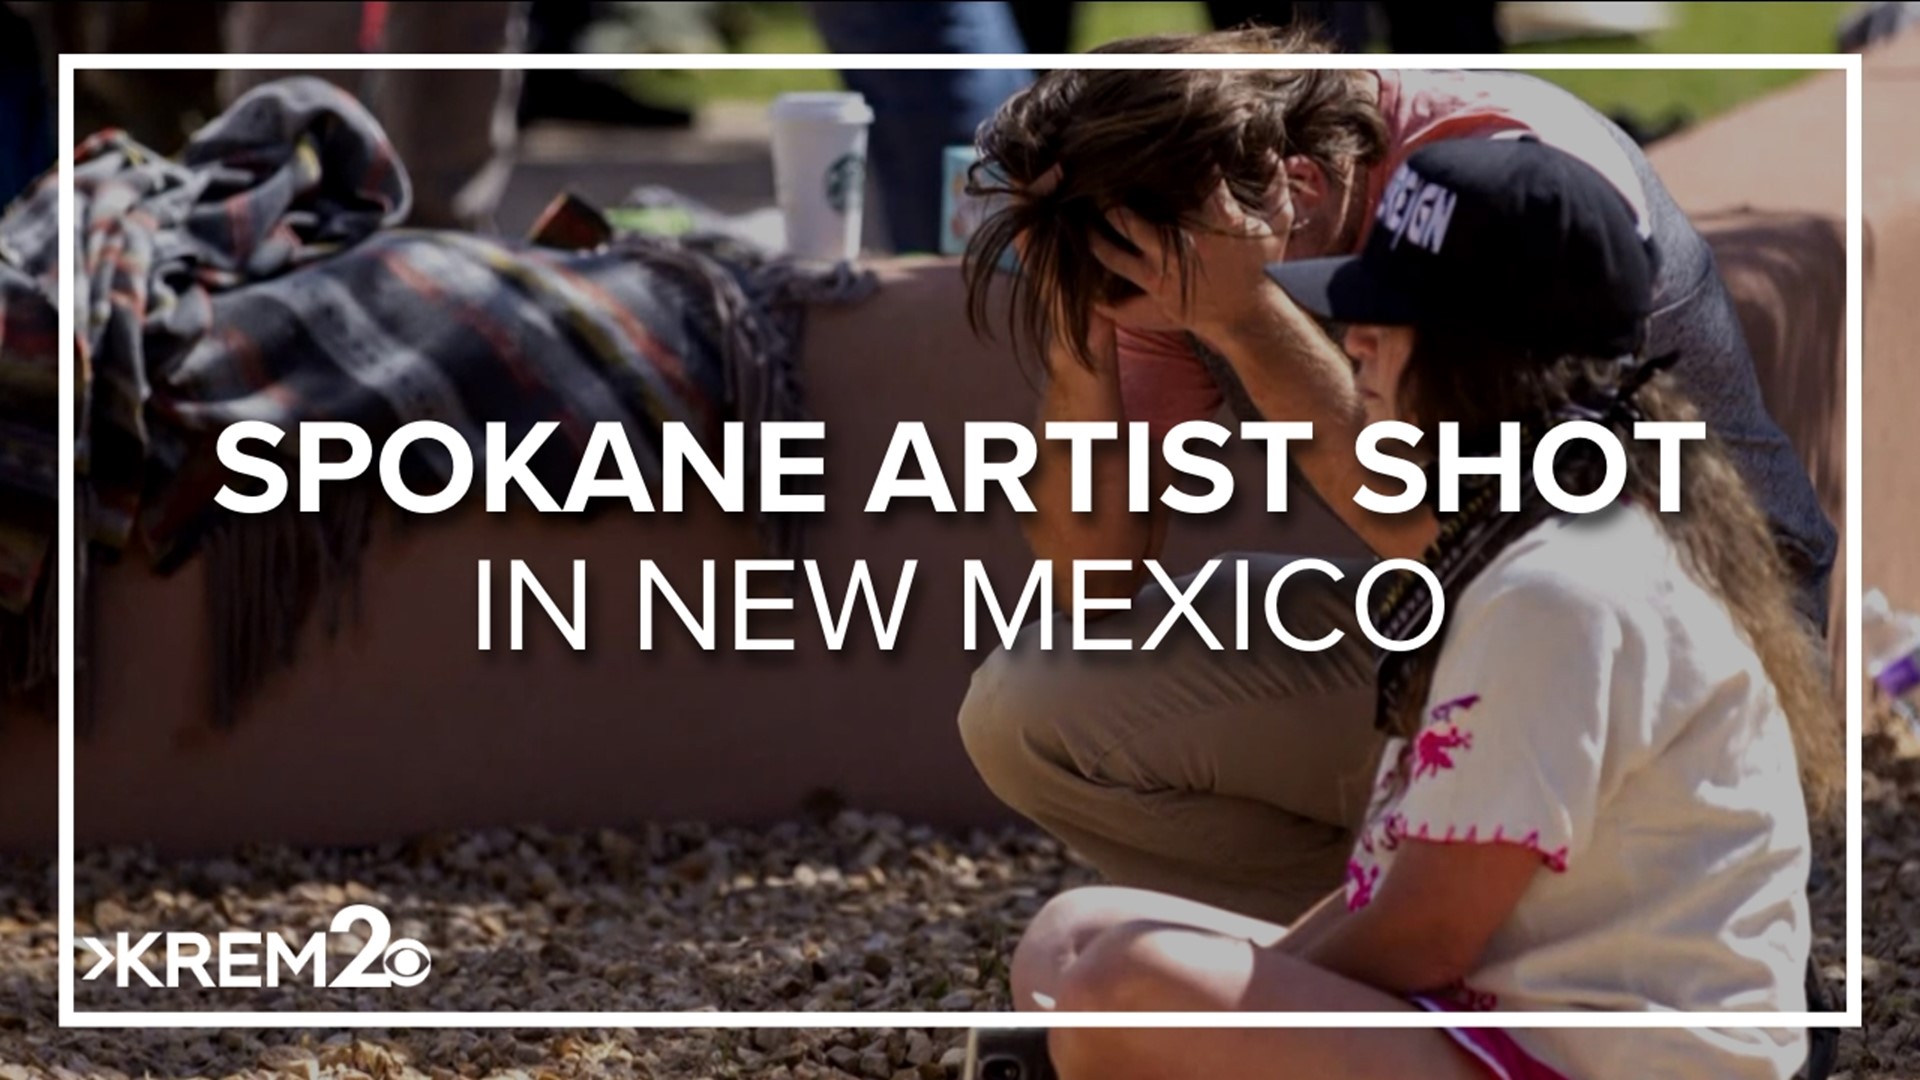 The artist and advocate was shot while attending a protest in New Mexico.